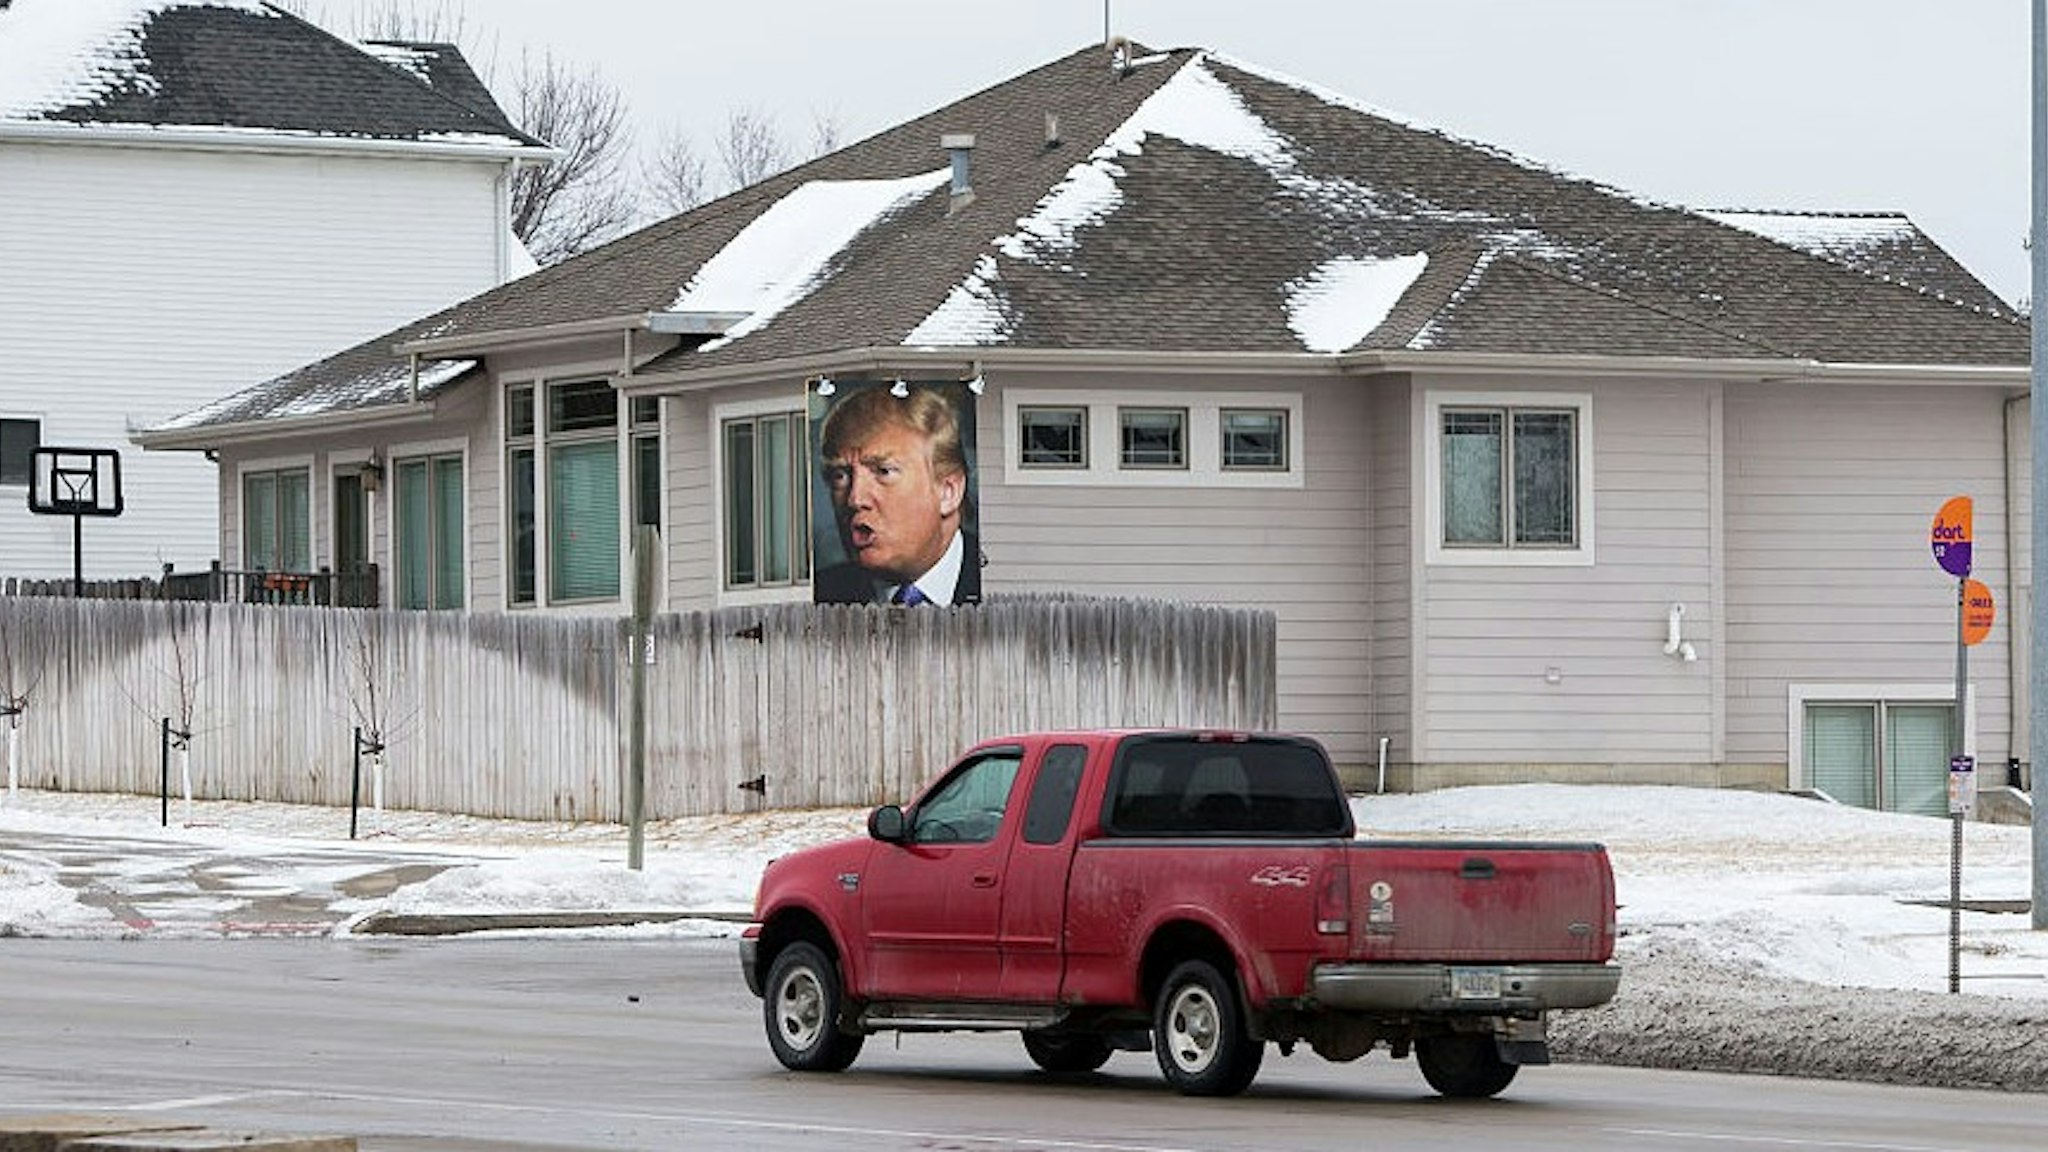 UNITED STATES - JANUARY 26 - A truck drives past a giant poster of Republican presidential candidate Donald Trump in supporter George Davey's backyard in West Des Moines, Iowa, Tuesday, January 26, 2016. (Photo By